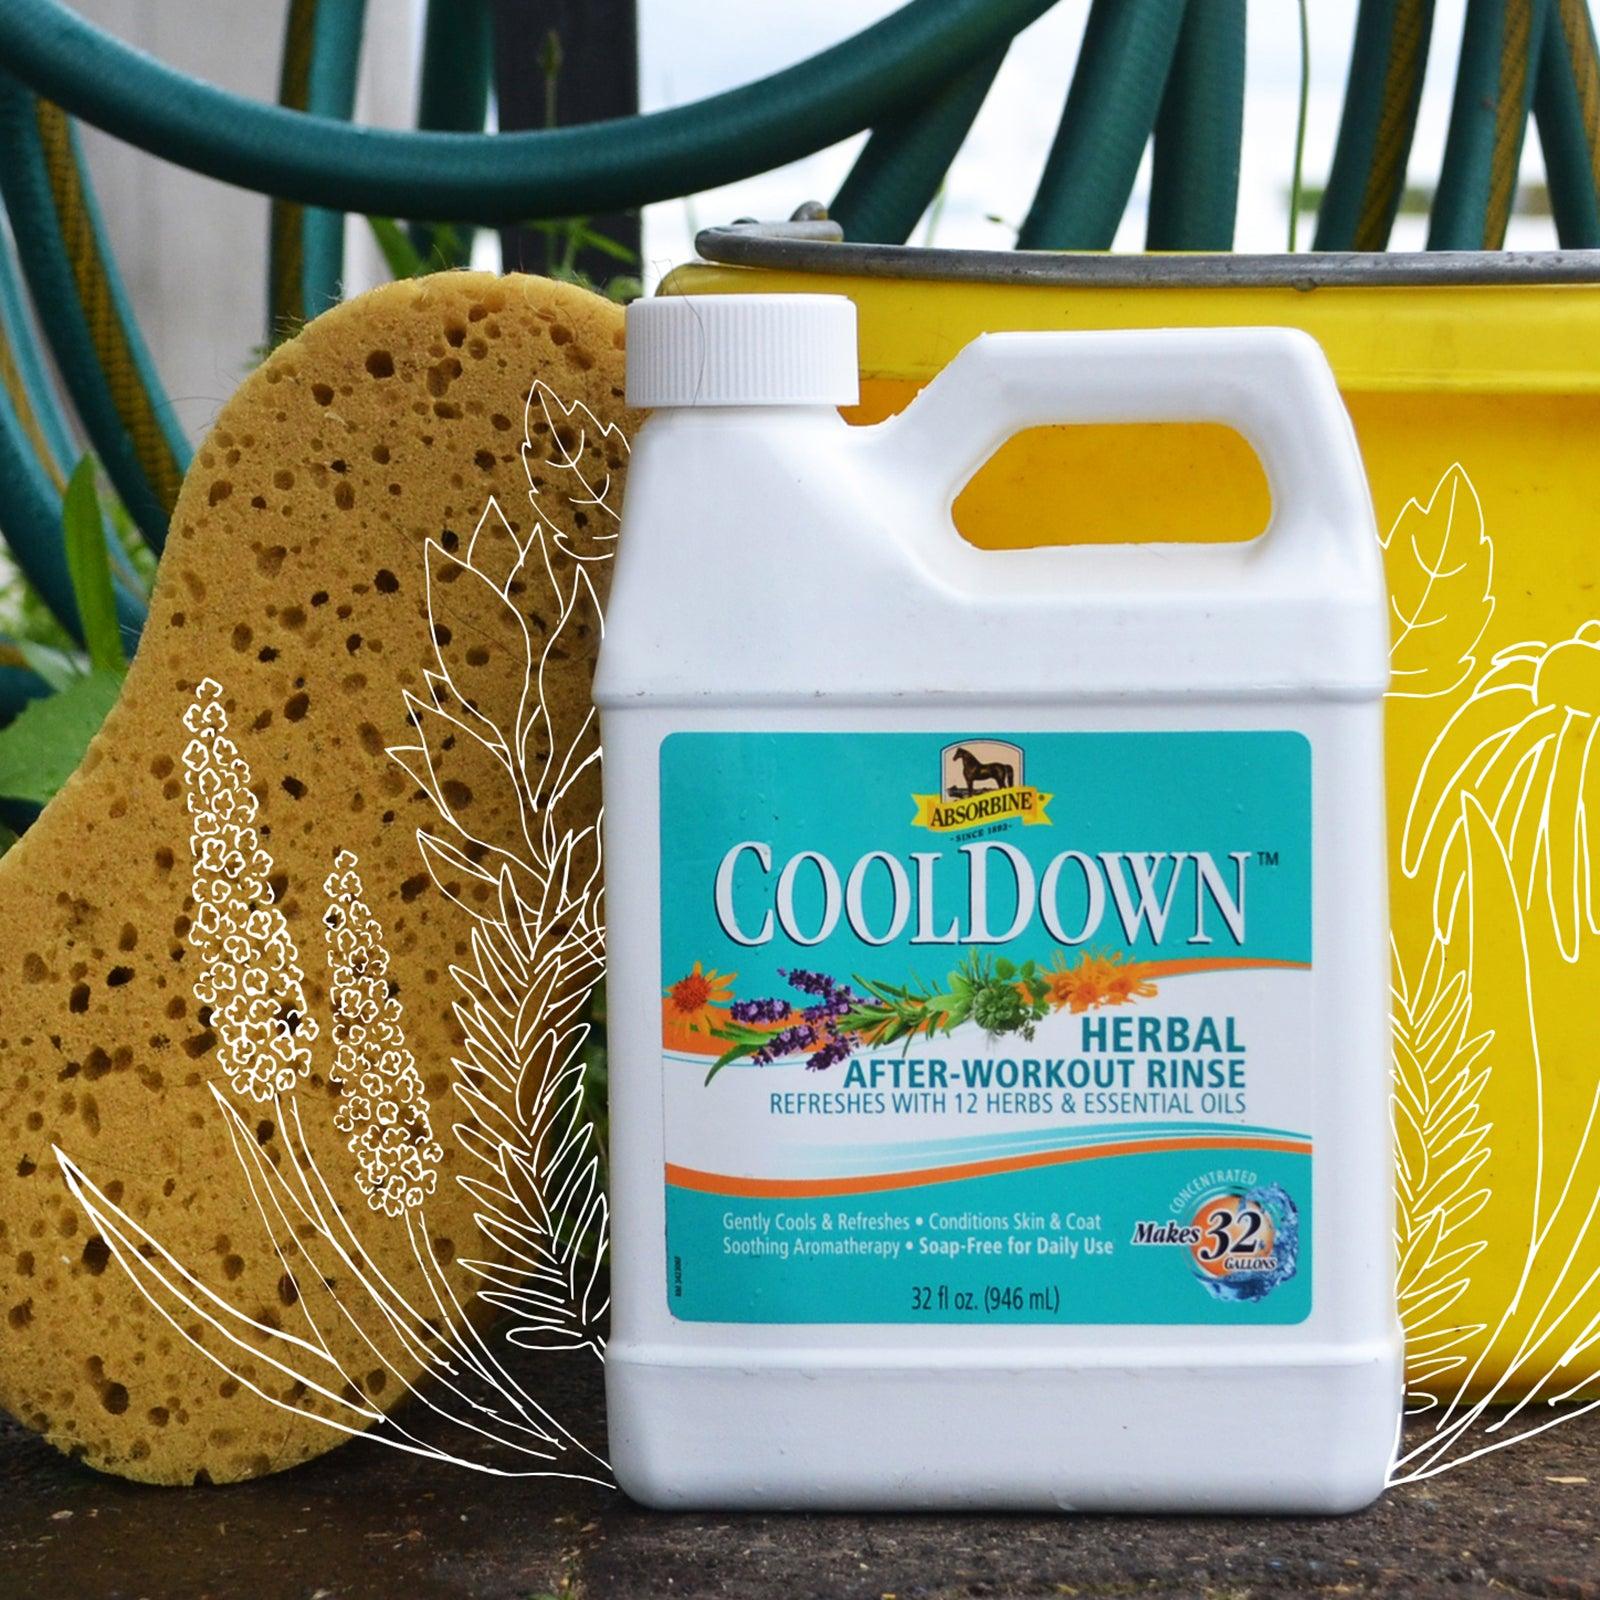 Picture of a bucket, a sponge, and Absorbine's CoolDown